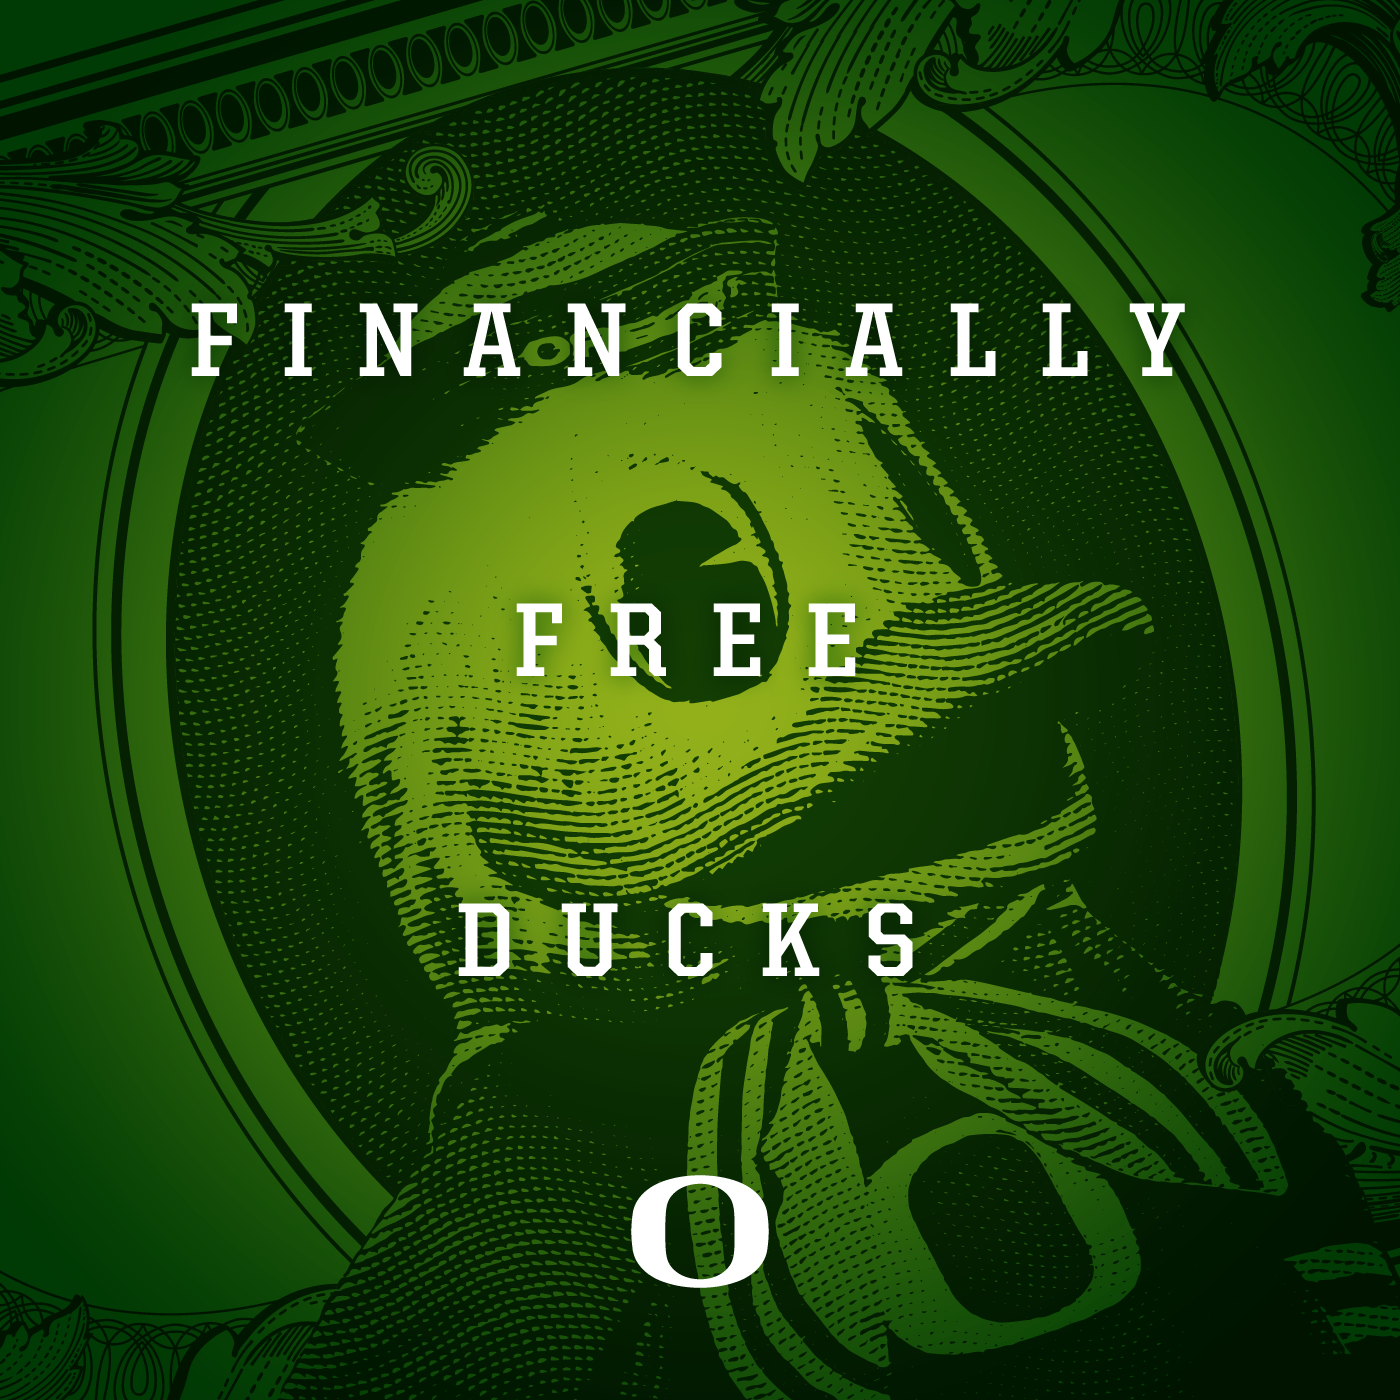 The UO Duck mascot posing as a currency head shot with the title Financially Free Ducks over the image.